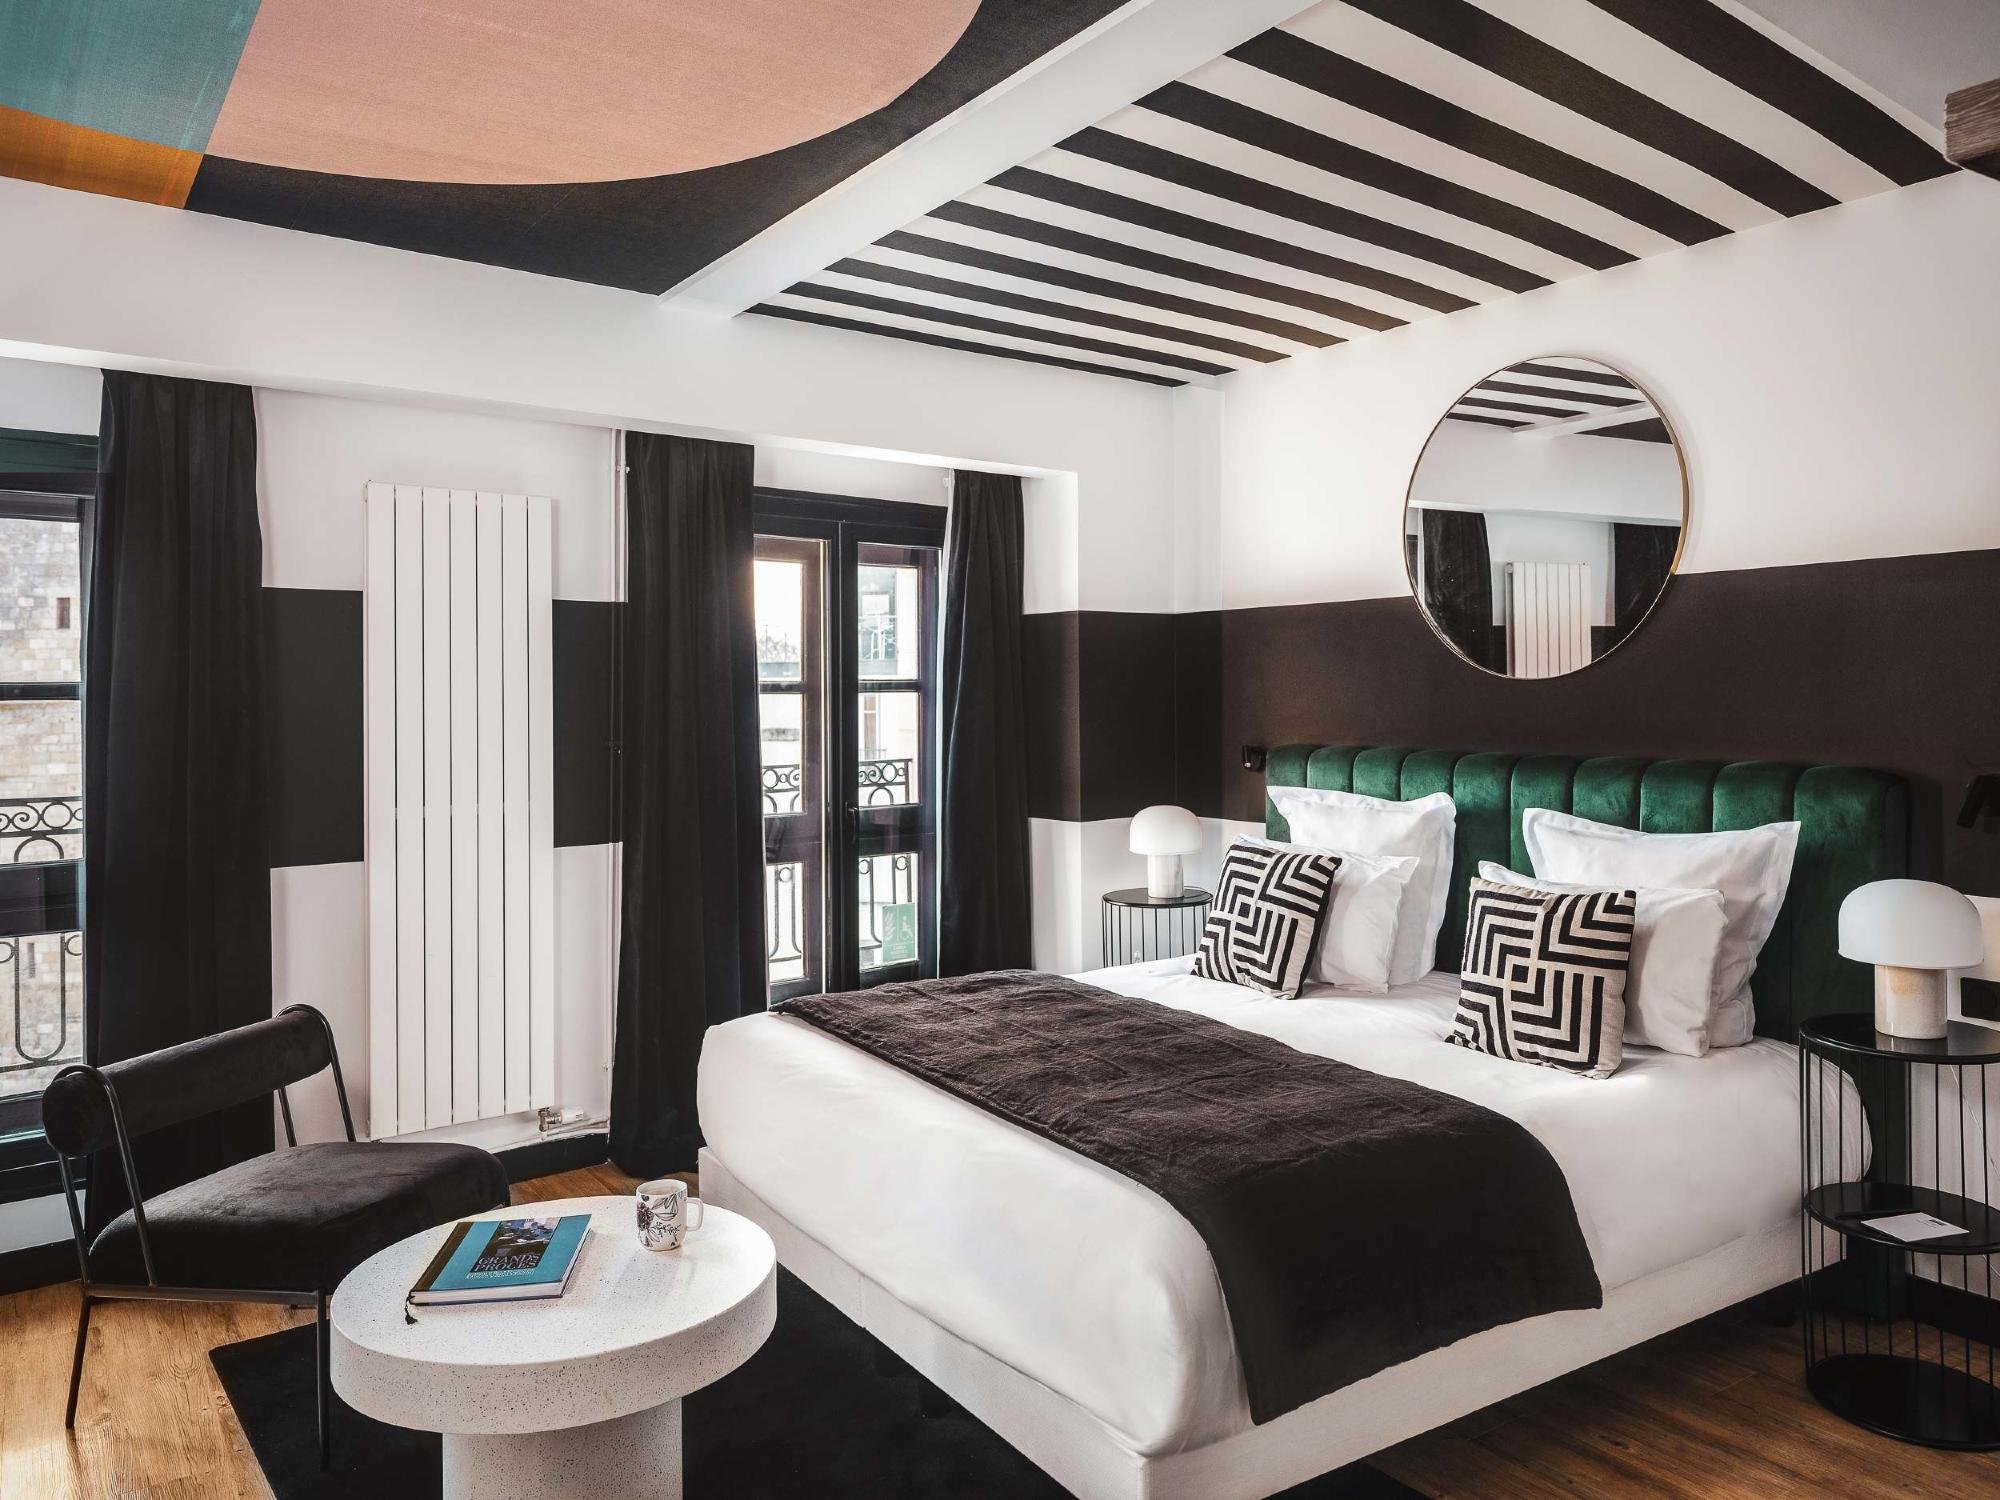 Maisons du Monde Hôtel & Suites opens a stylish and welcoming new